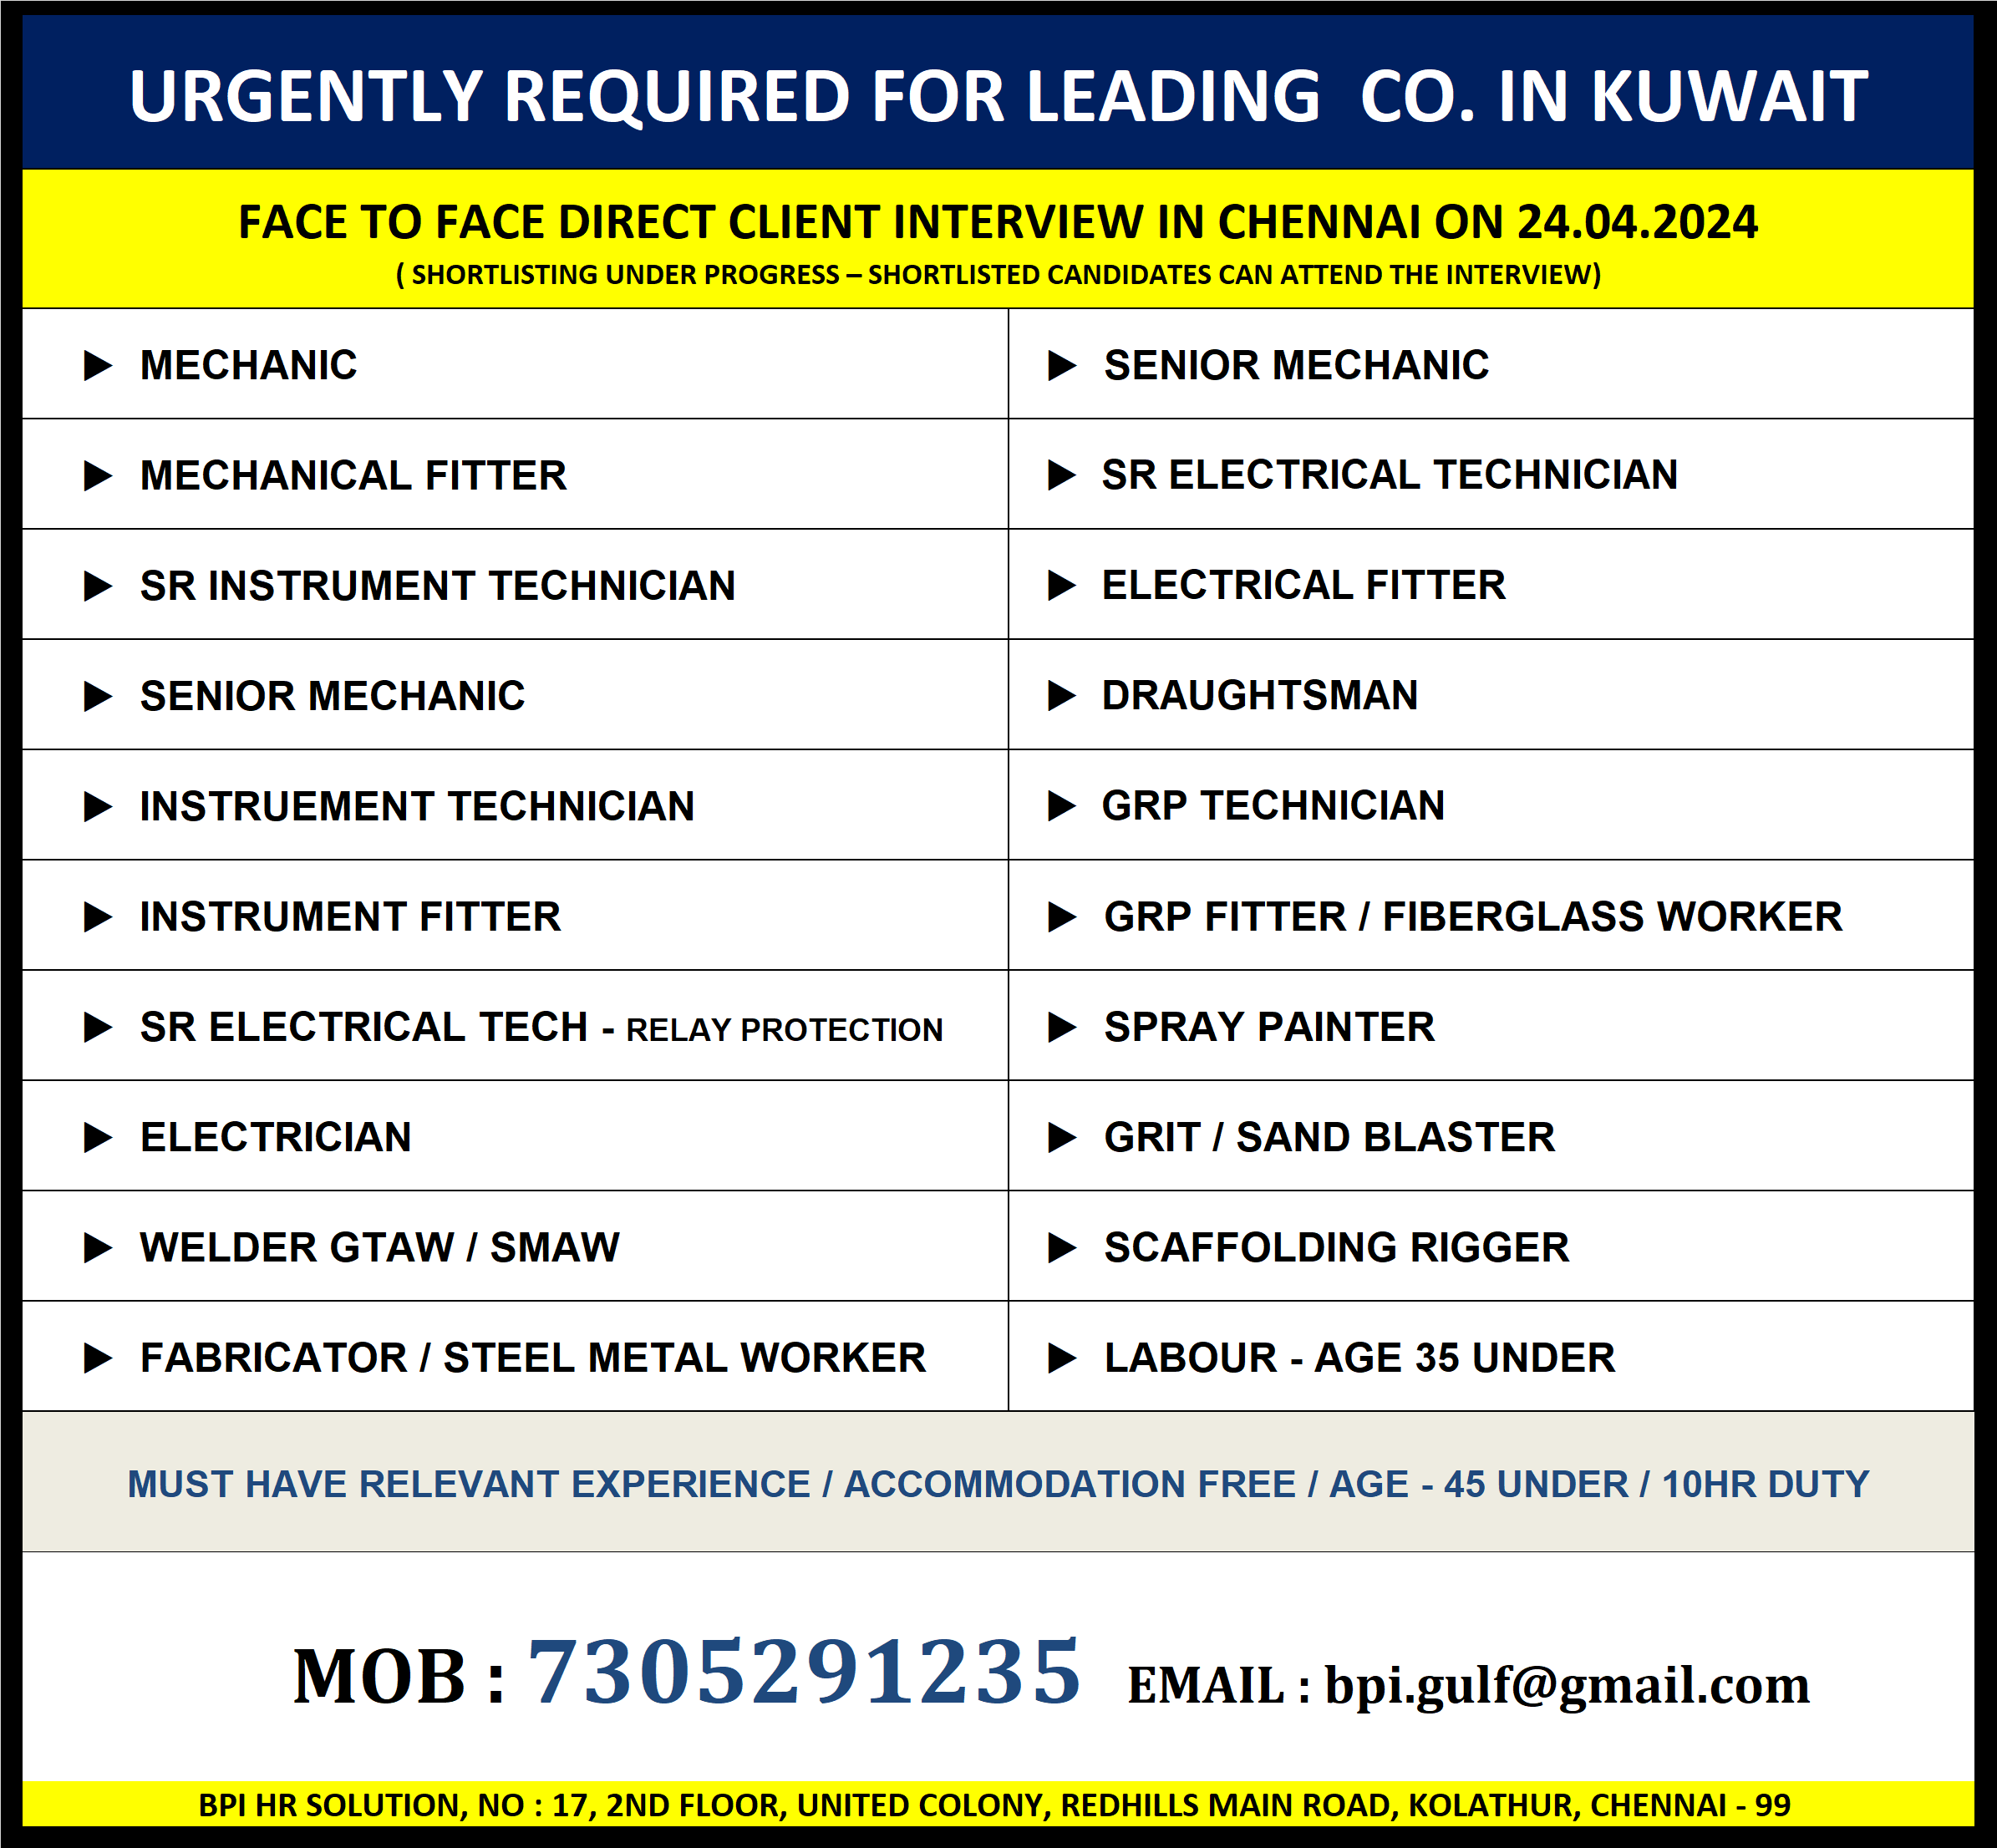 URGENTLY REQUIRED FOR A LEADING CO. IN KUWAIT INTERVIEW IN CHENNAI ON 24.04.2024